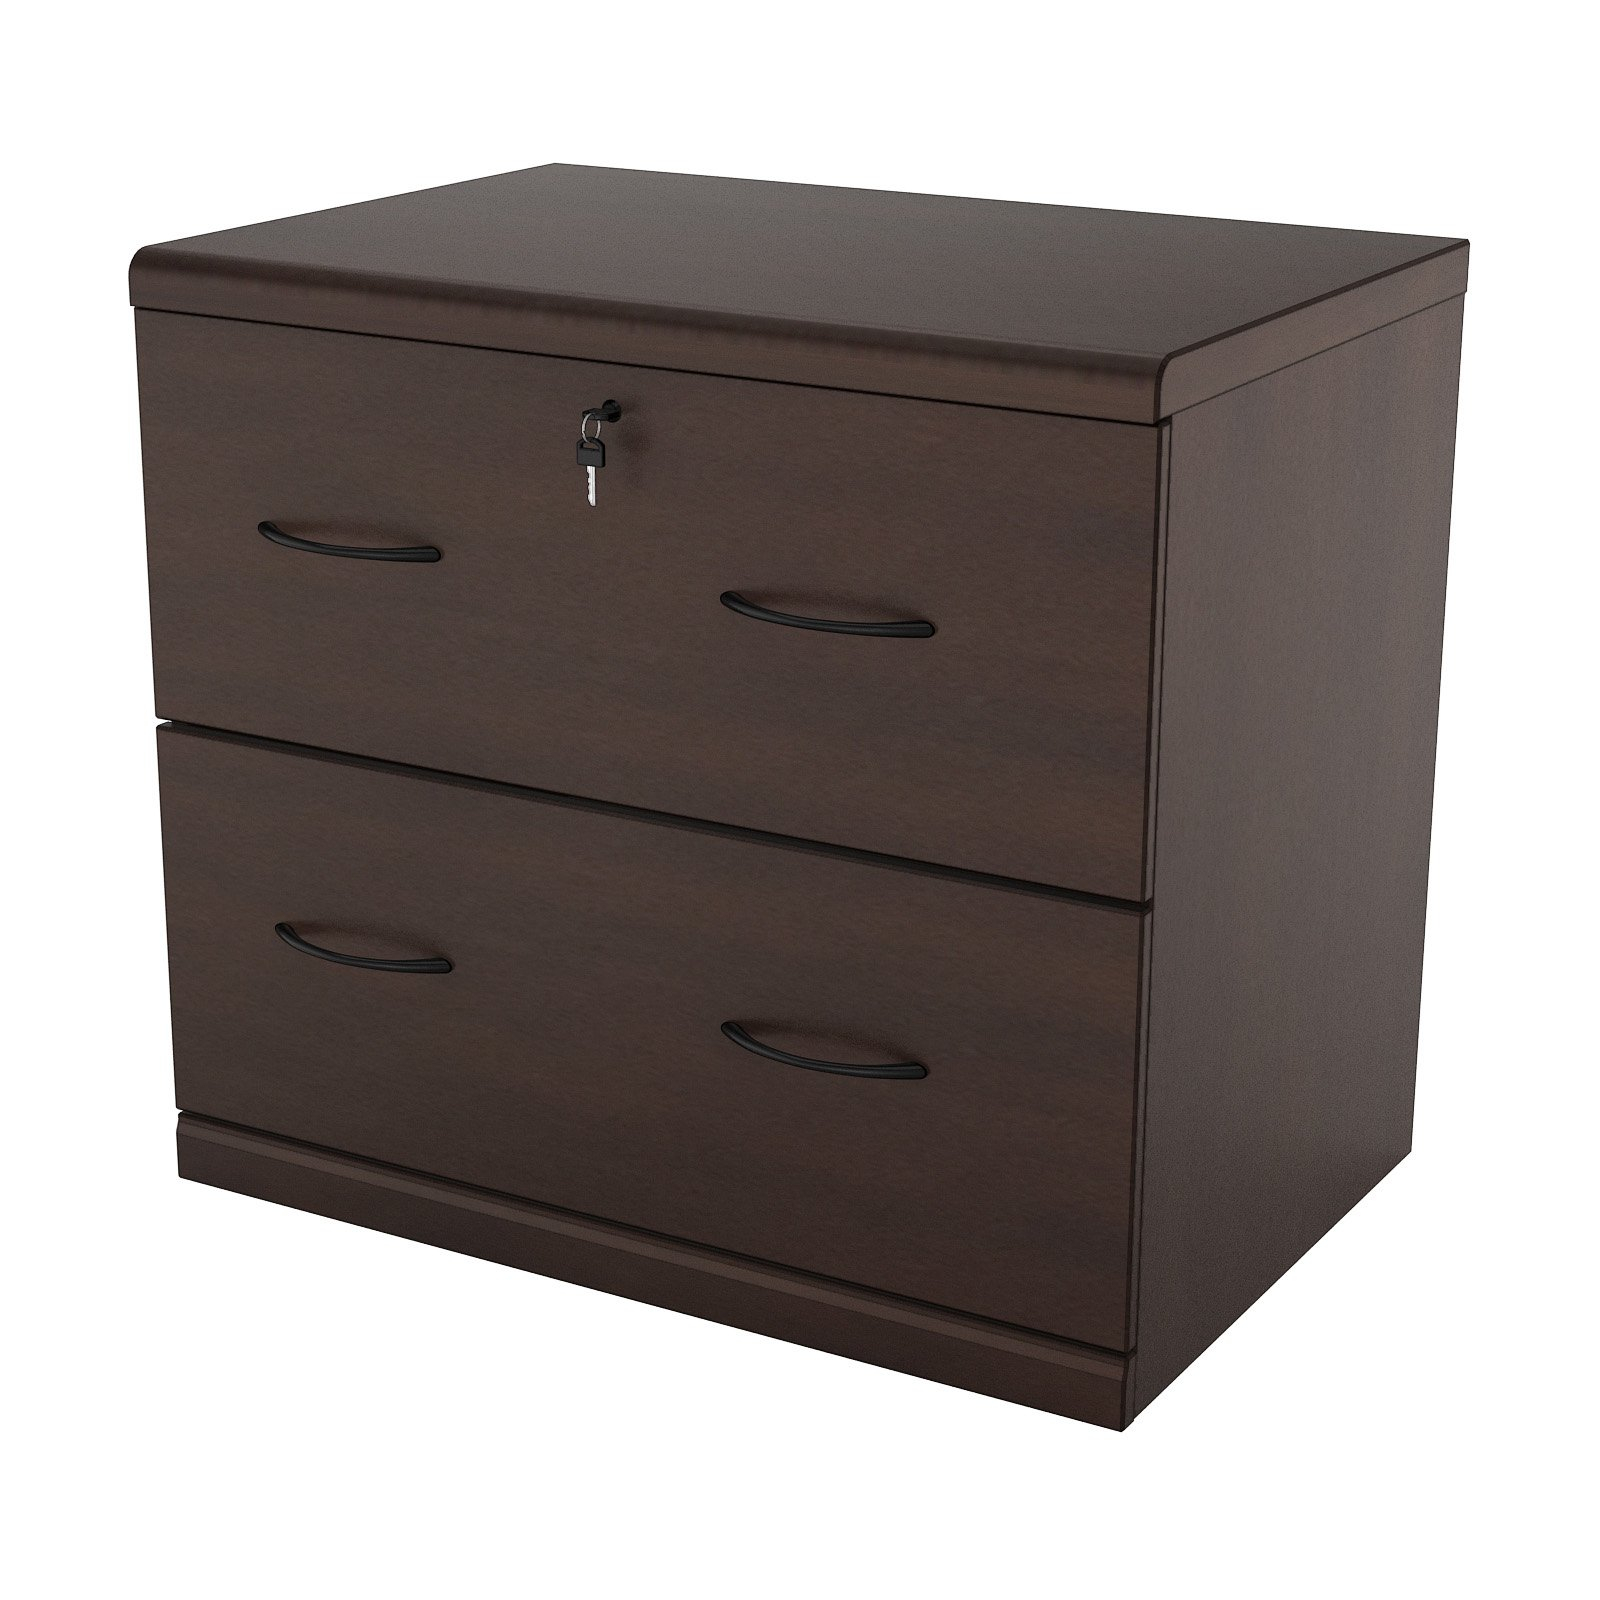 2 Drawer Lateral Wood Lockable Filing Cabinet Espresso regarding size 1600 X 1600